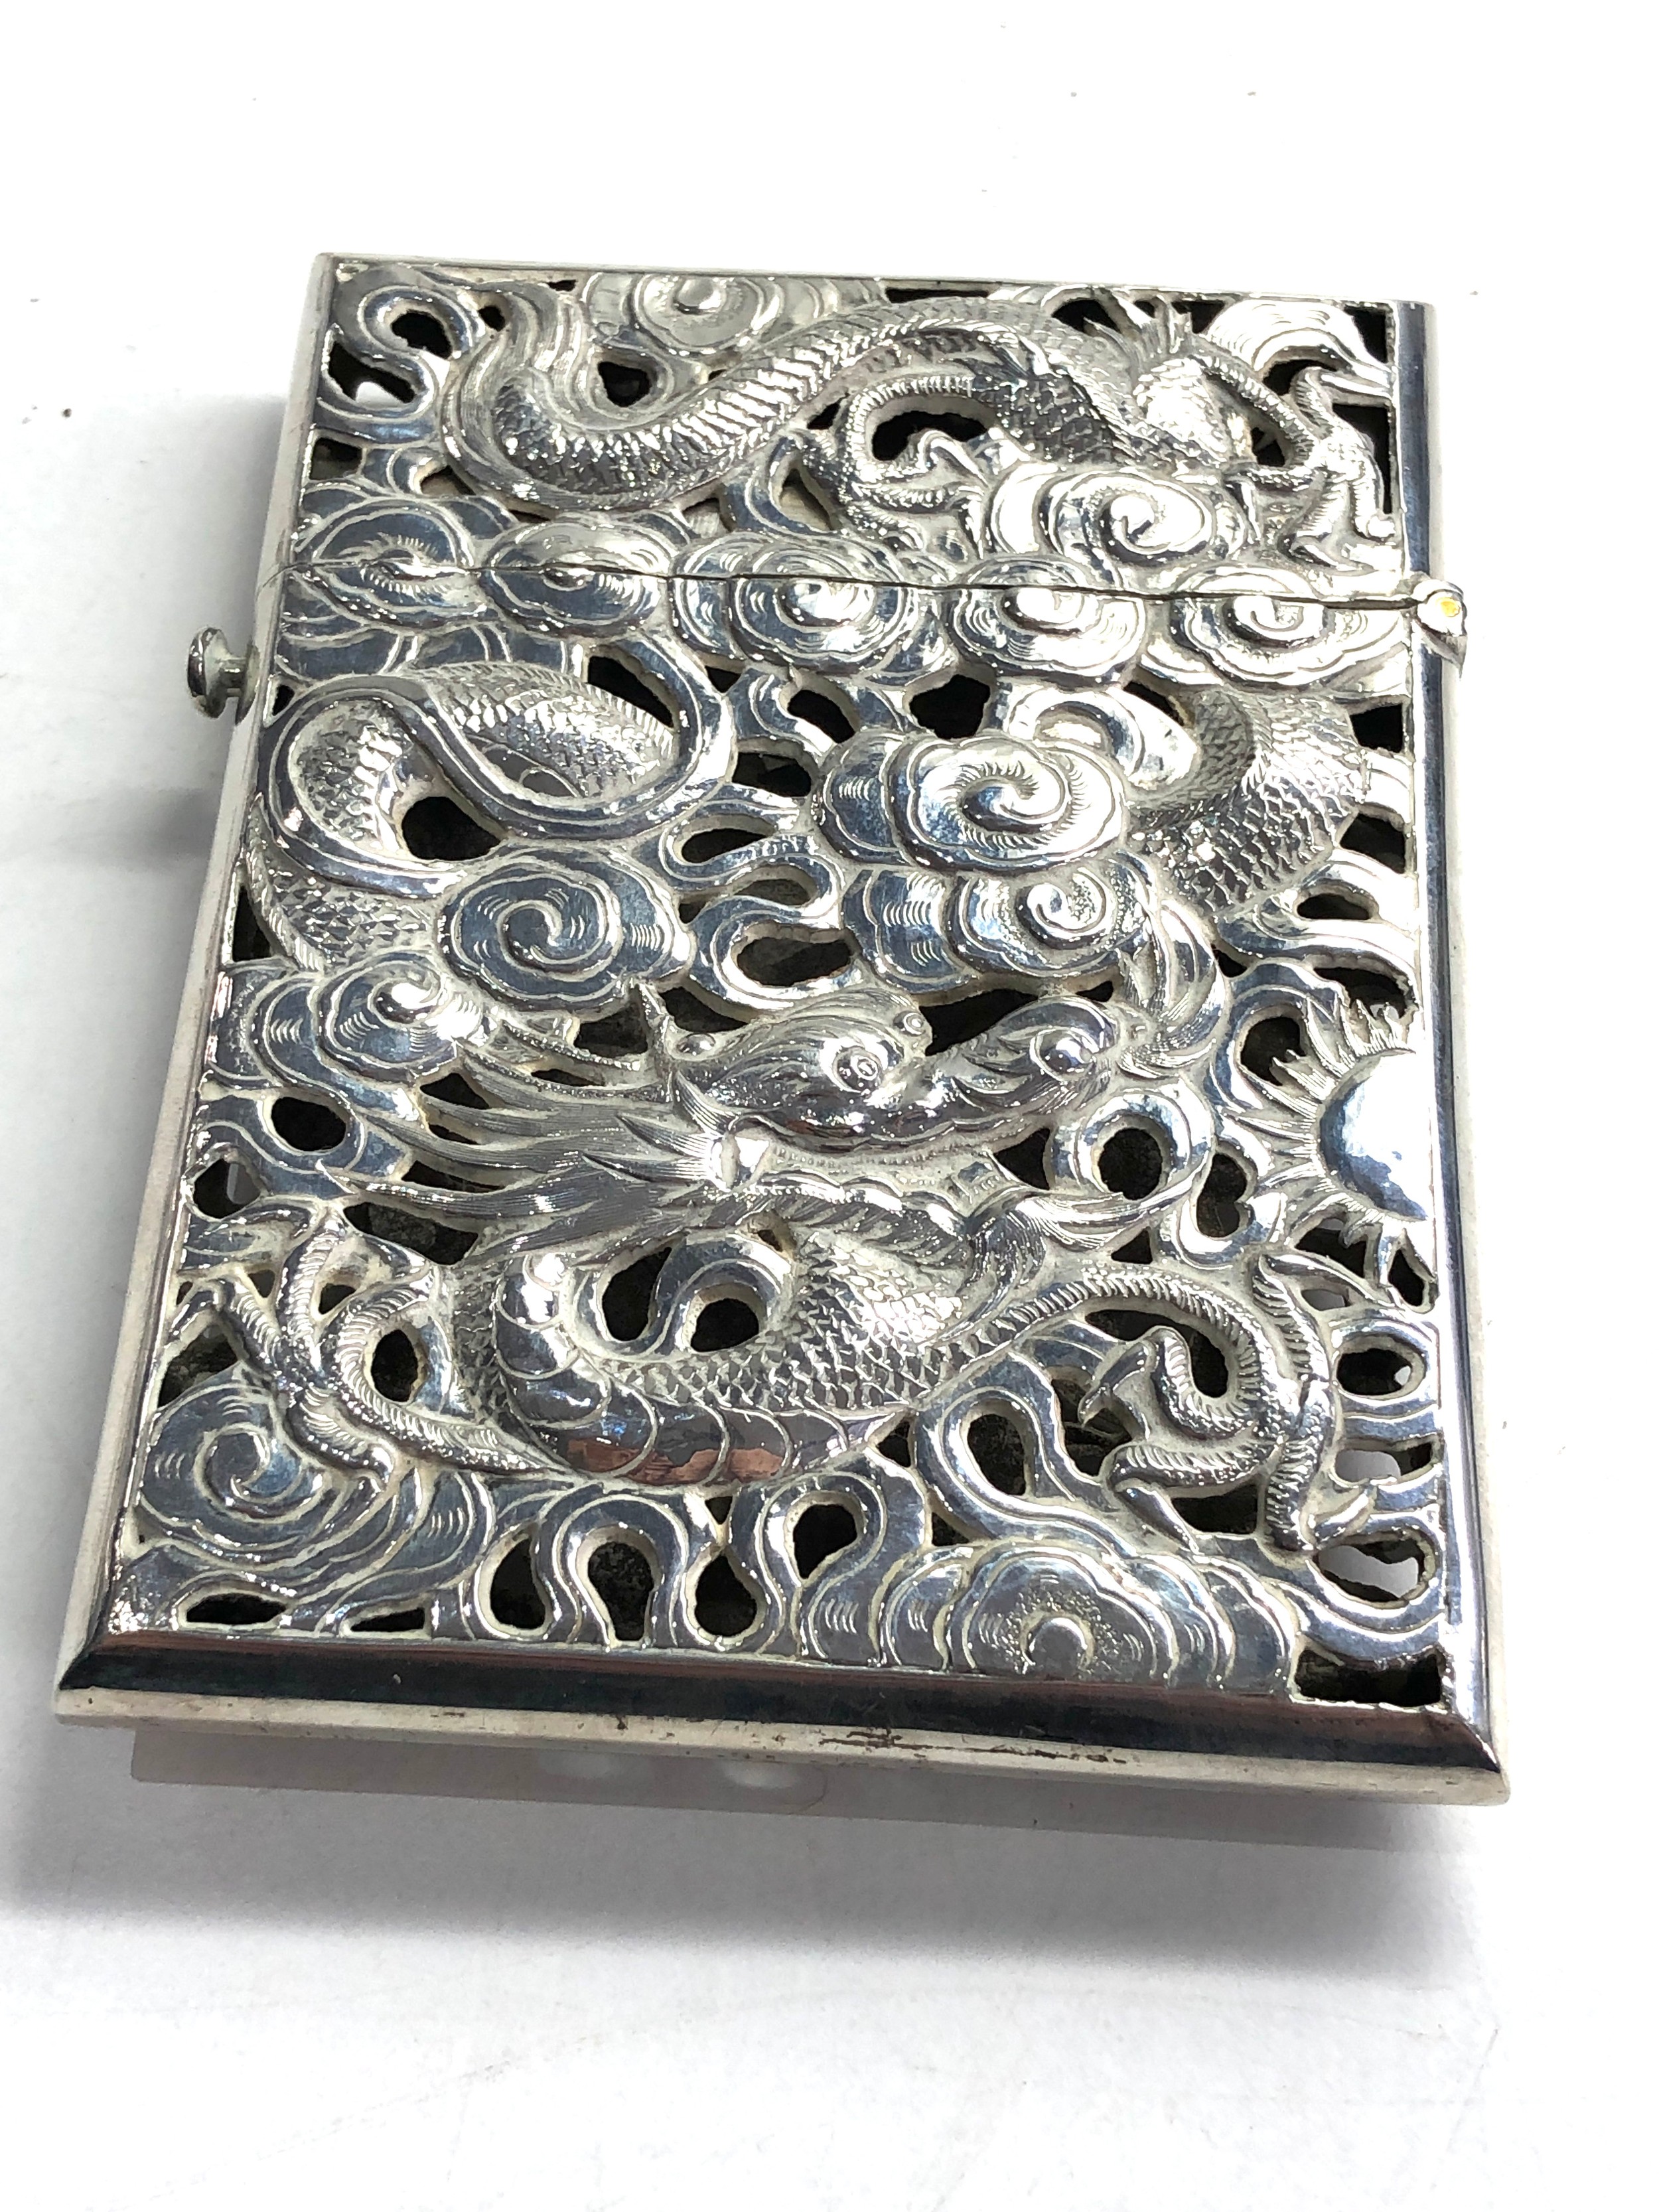 Chinese silver card case weight 116g - Image 2 of 3